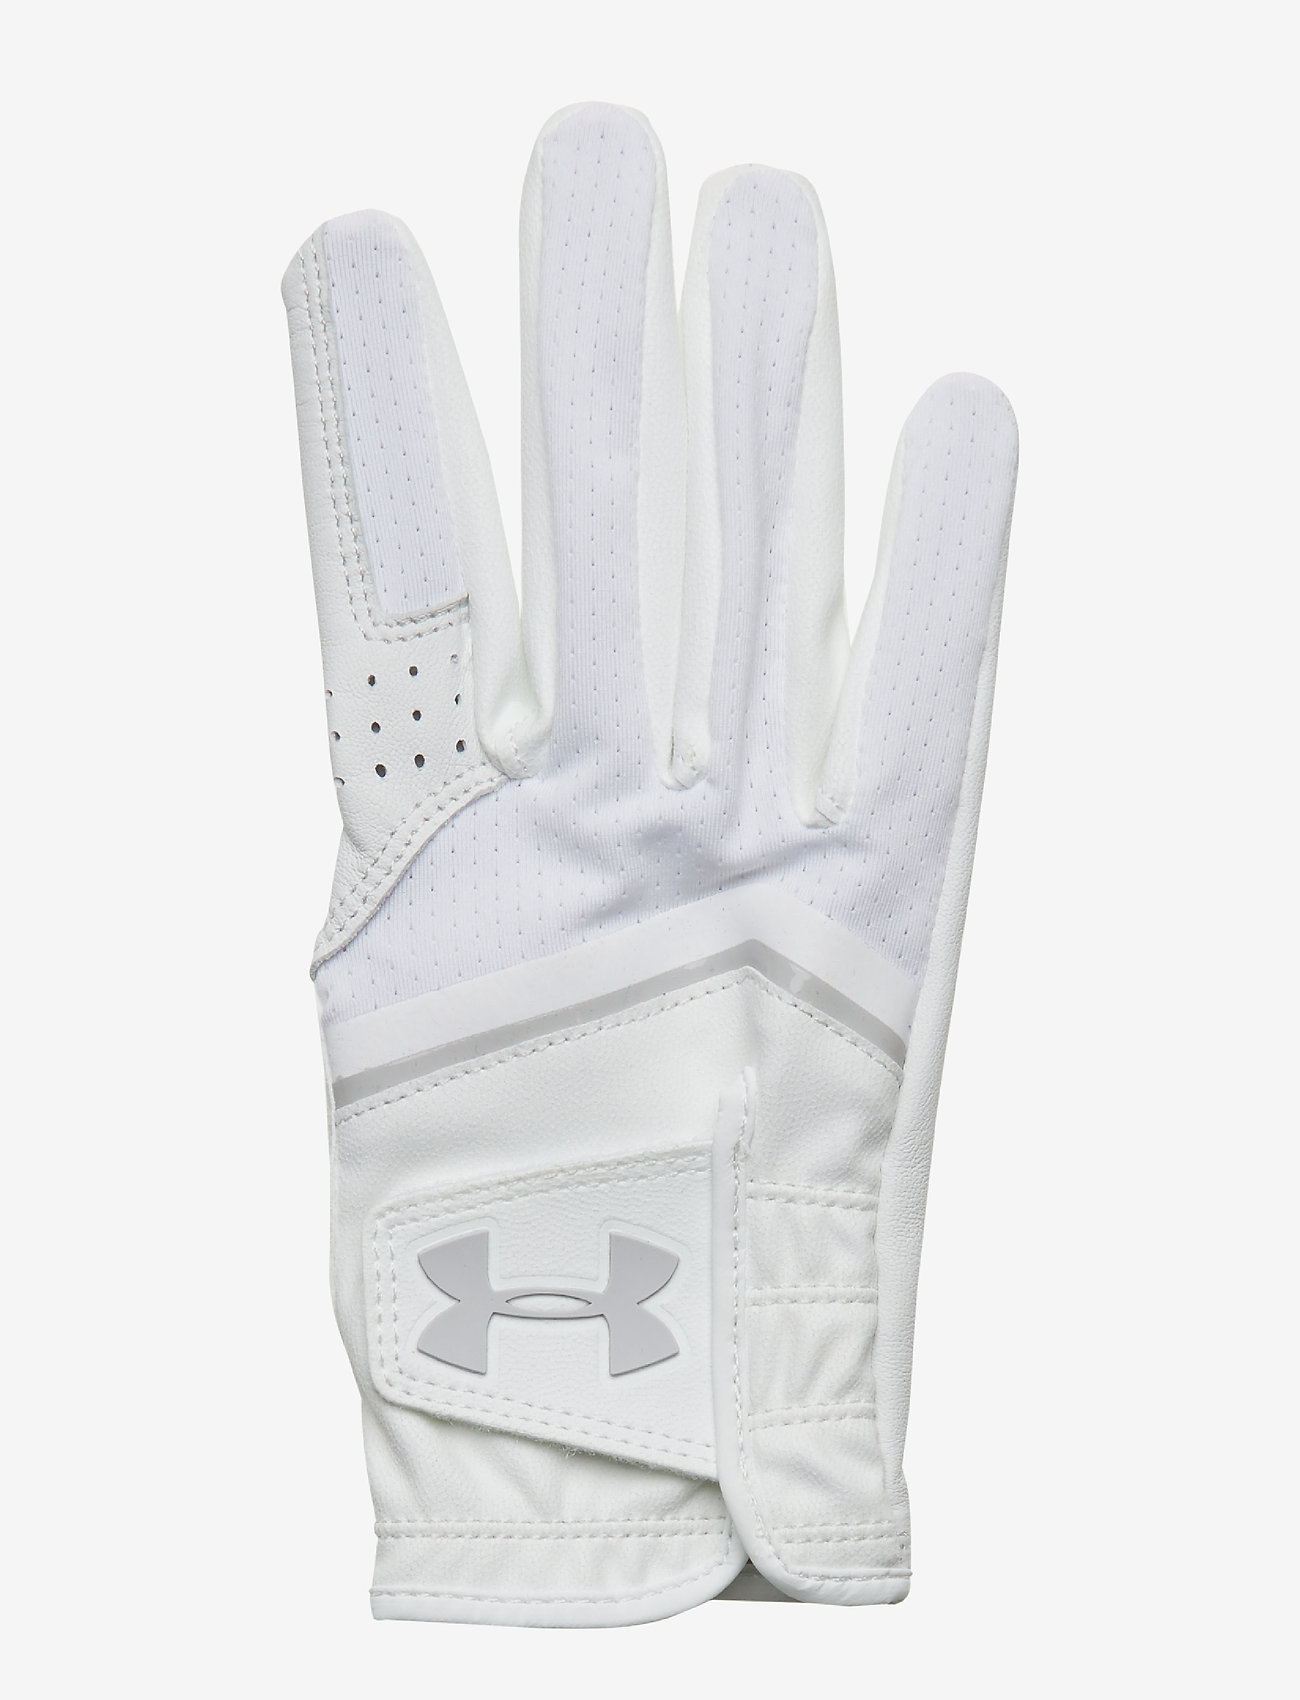 under armour coolswitch golf glove